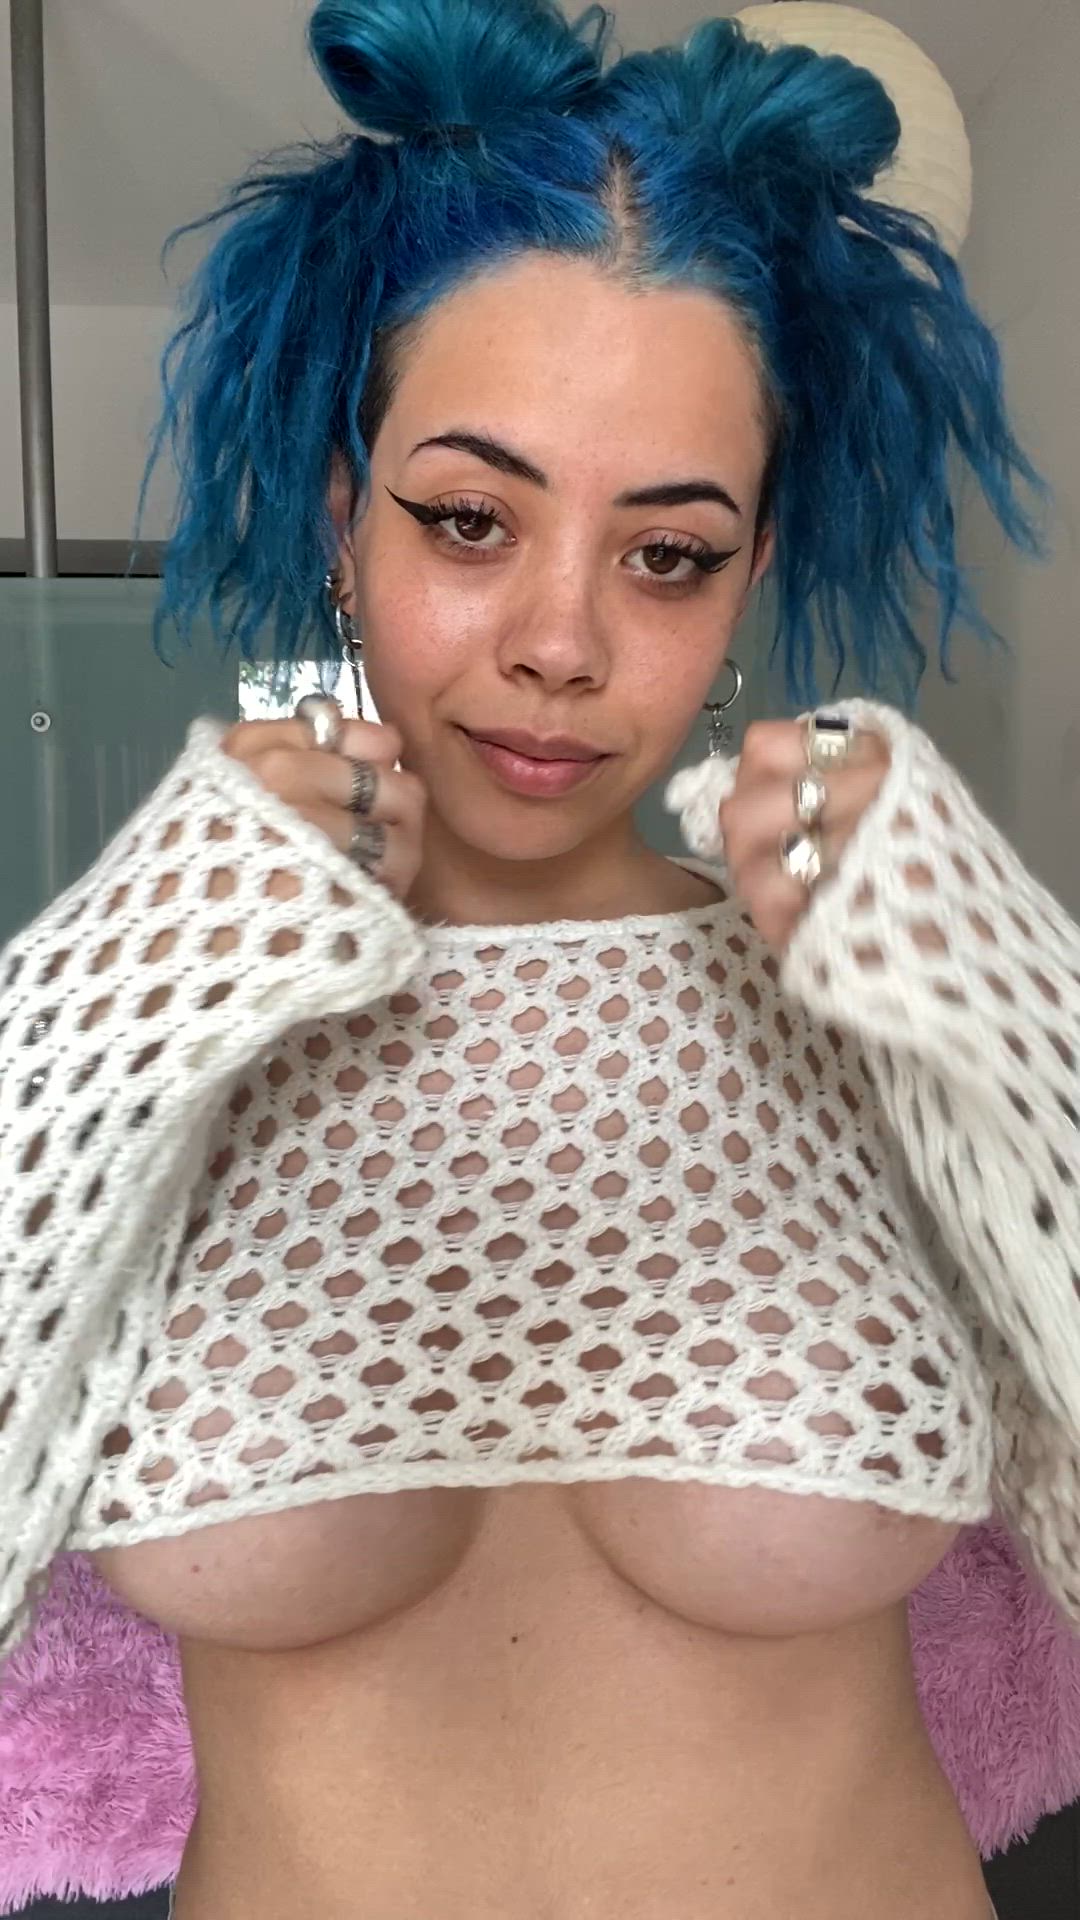 Amateur porn video with onlyfans model trixiexfantasy <strong>@trixiefantasyy</strong>